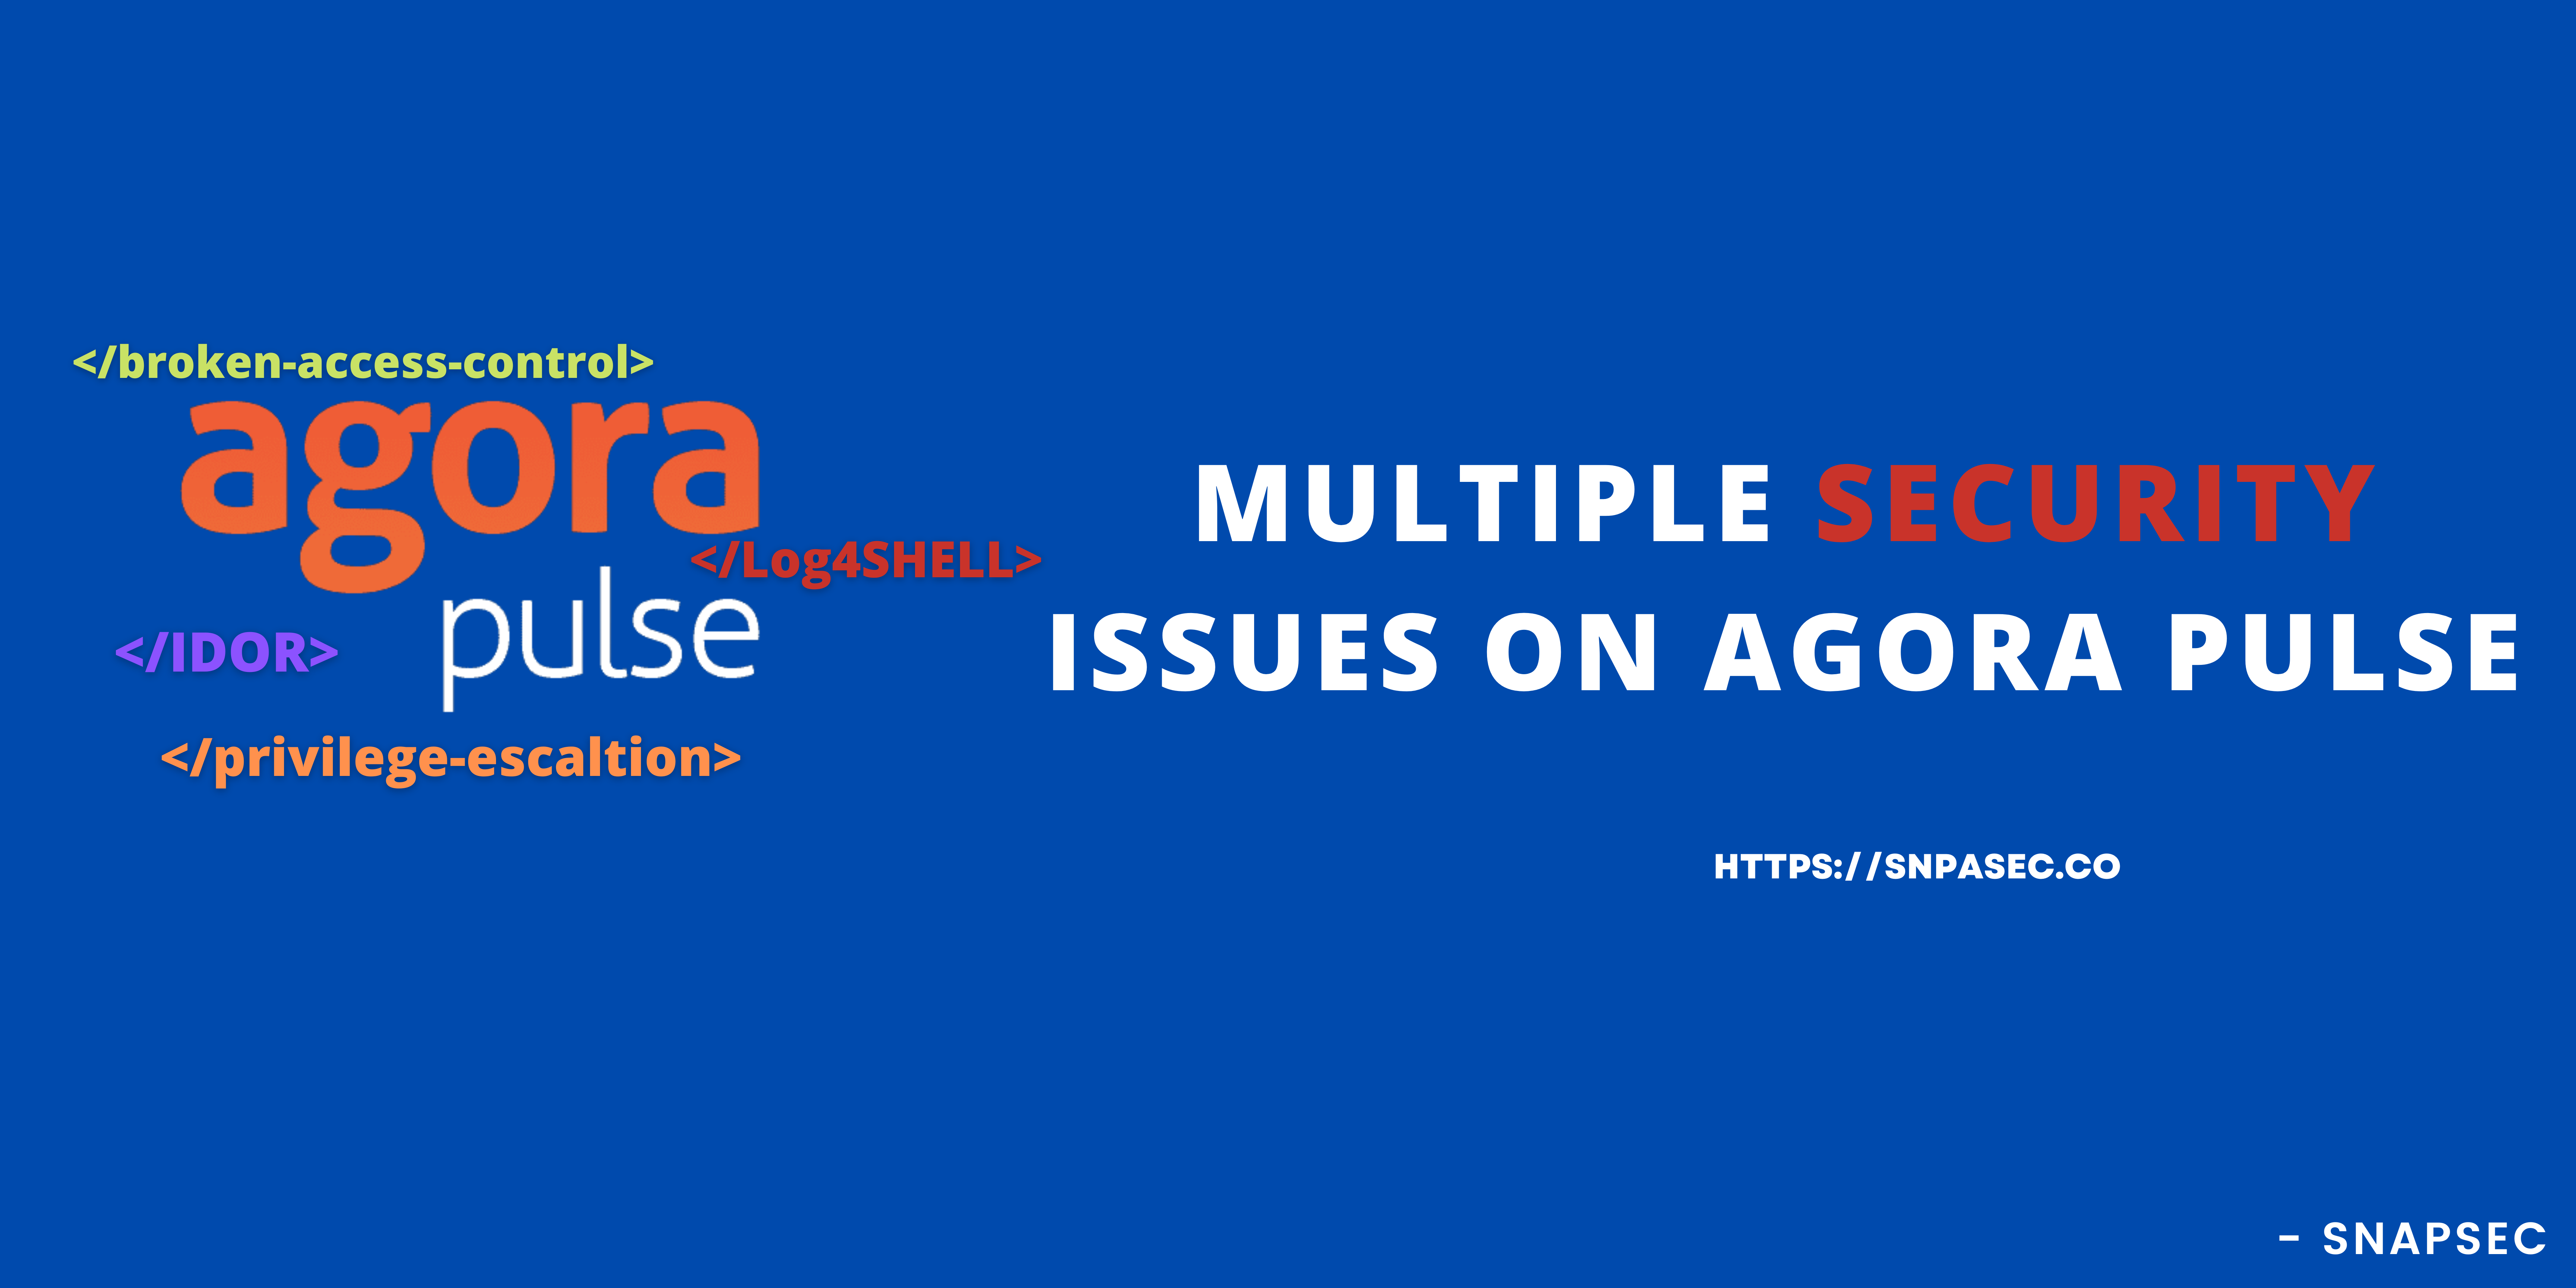 Finding Multiple Security Issues on Agorapulse